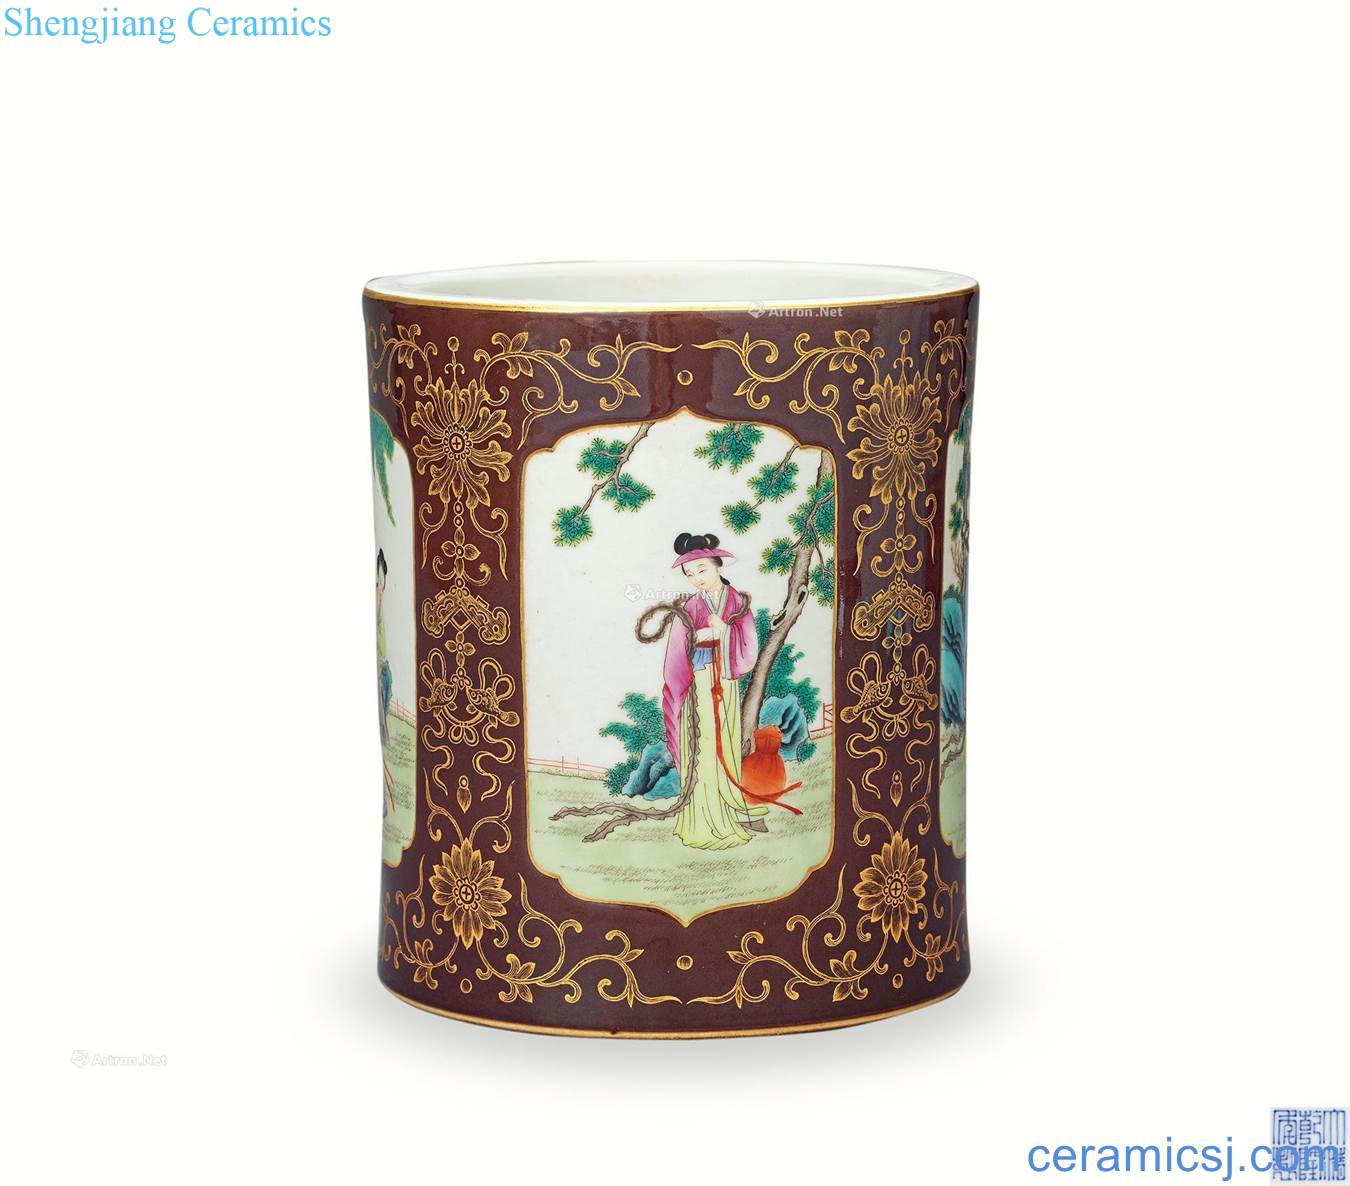 In the qing dynasty zijin glaze colour window famille rose had pen container